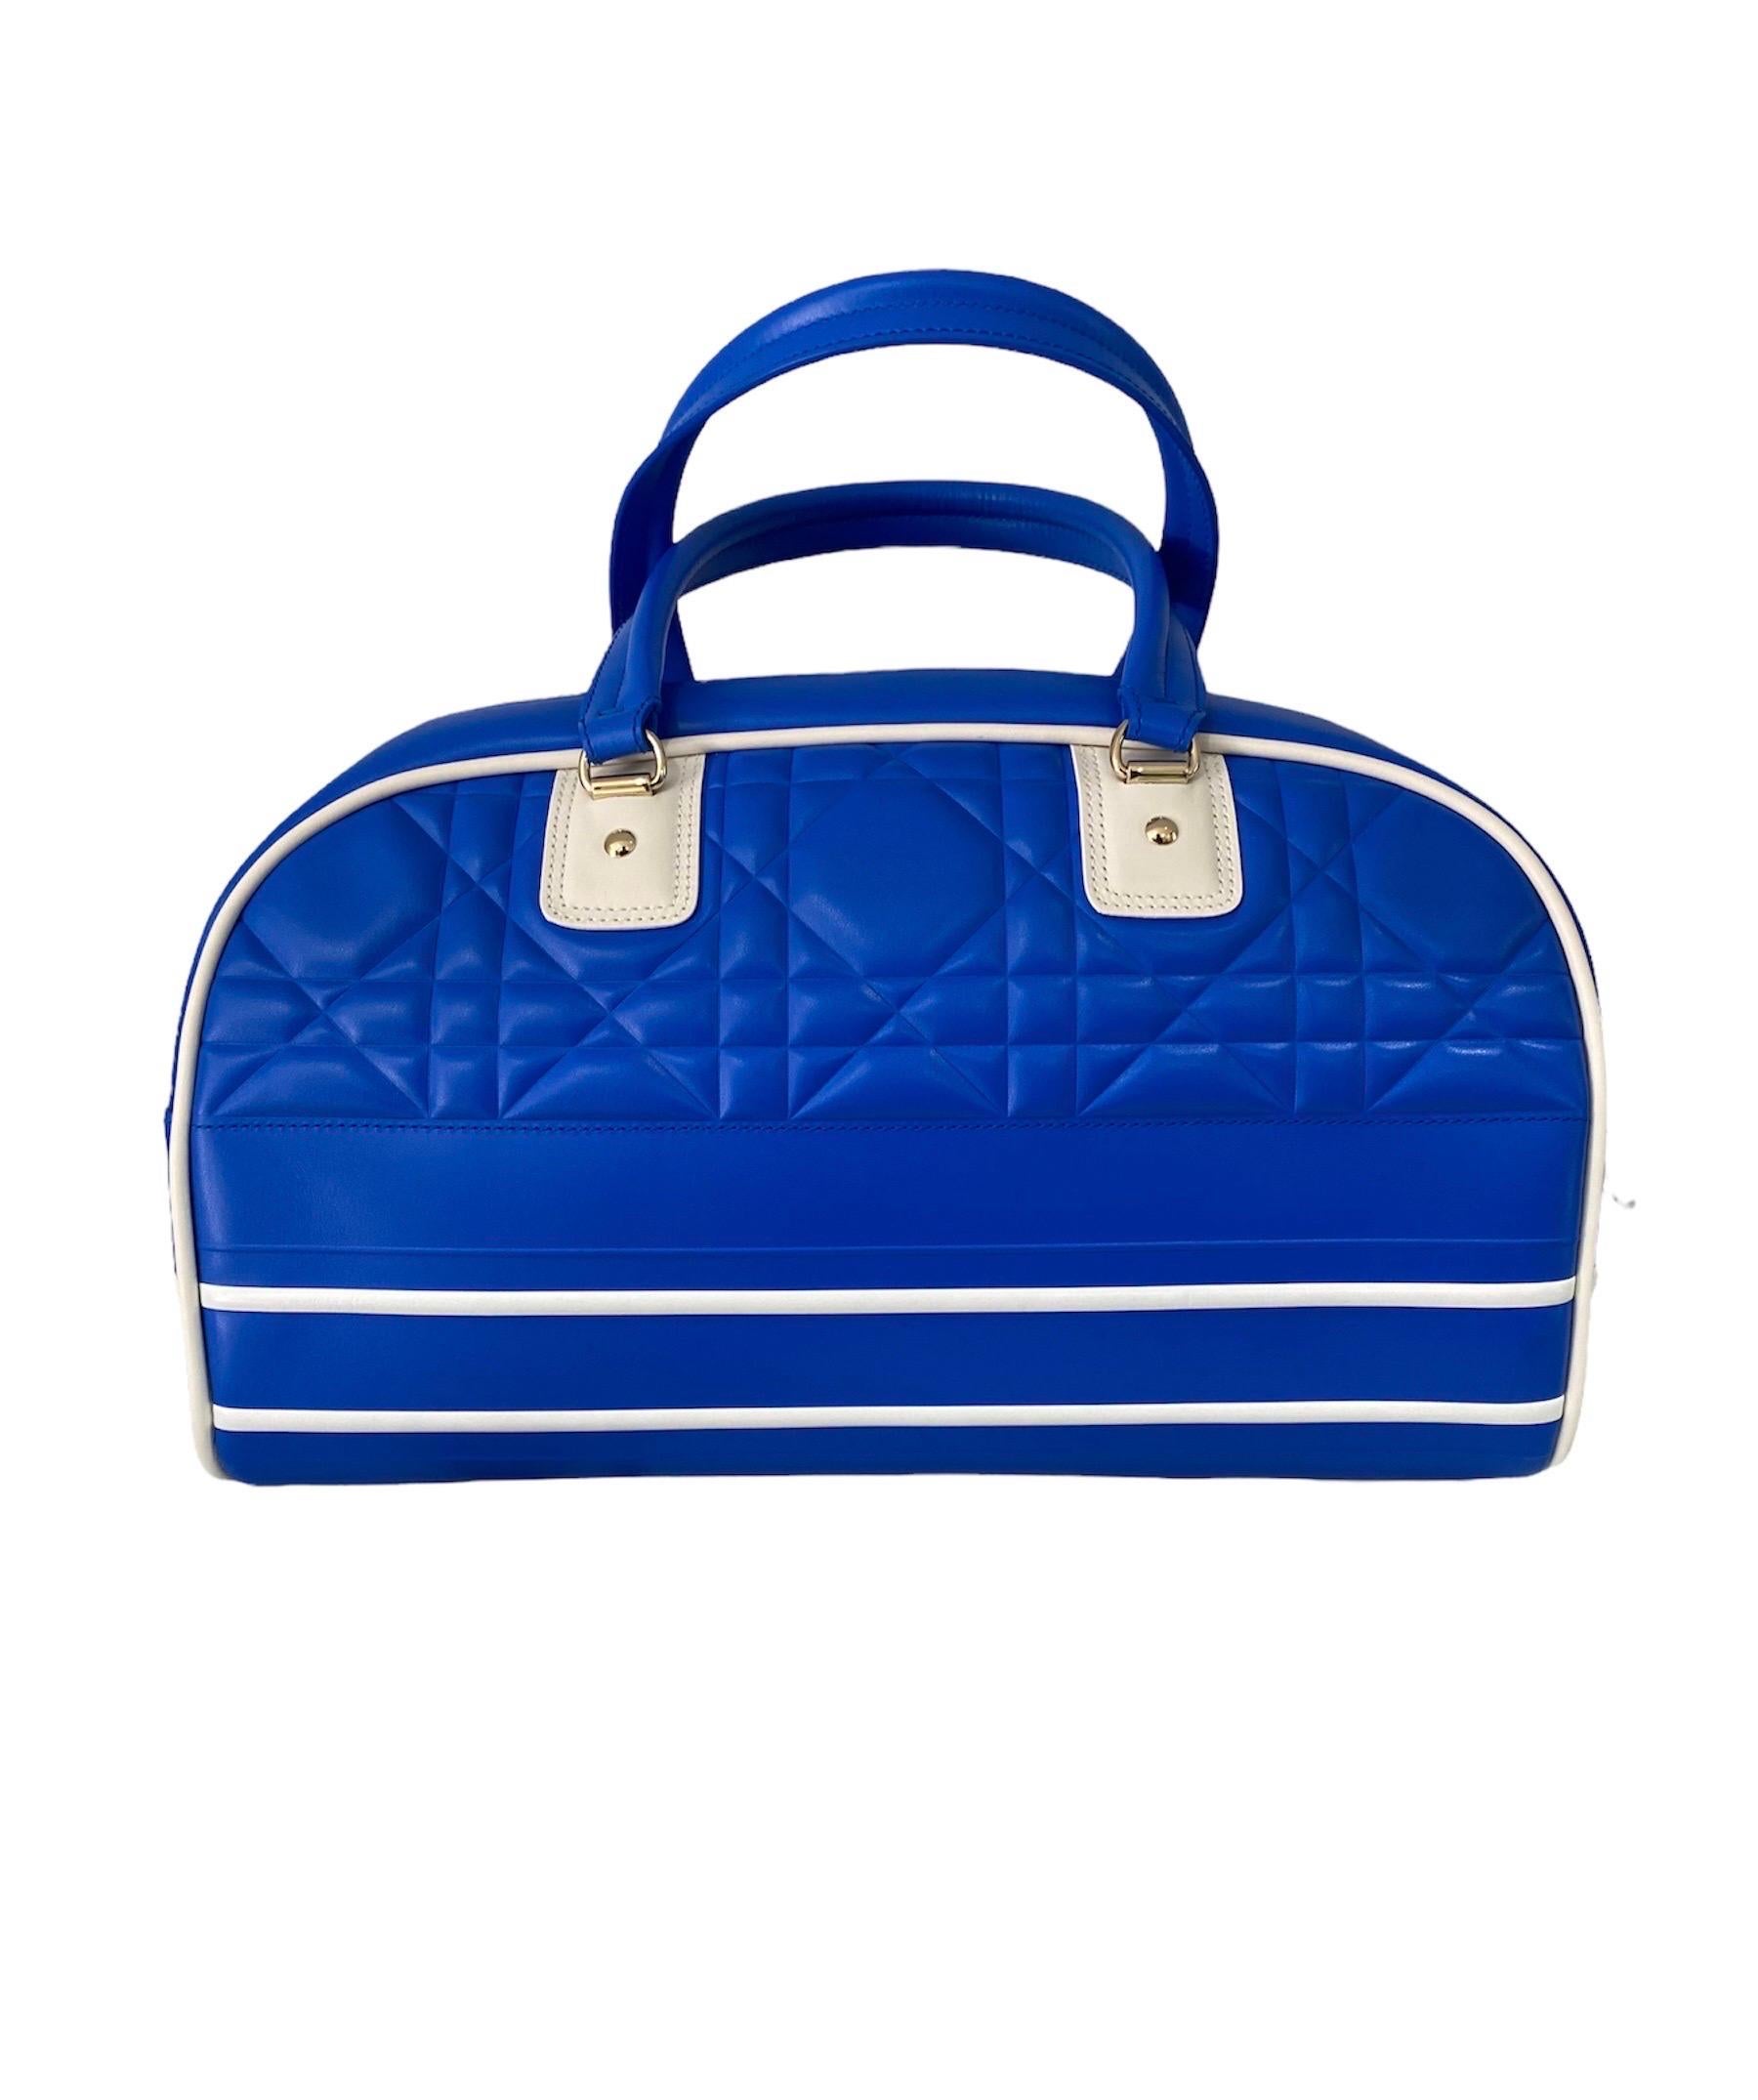 The Dior Vibe Bowling Bag with zip, new this season, is a functional creation conceived by Maria Grazia Chiuri, which combines a sporty style with the sartorial spirit of the Maison. Made of black and white padded Macrocannage calfskin, it is